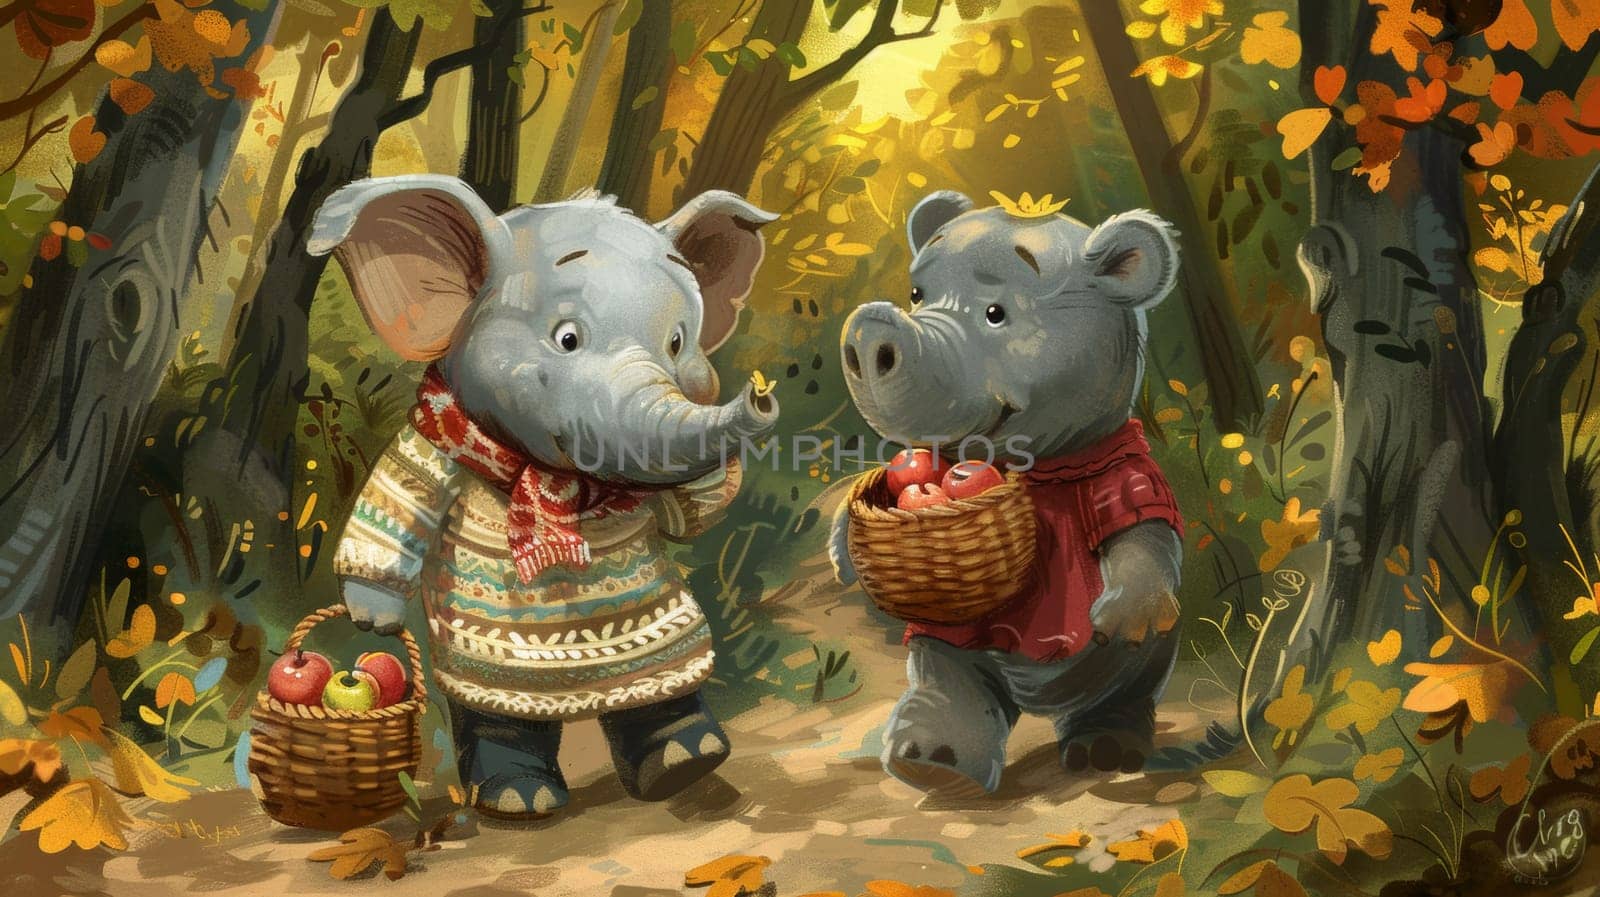 Two elephants are walking through a forest with apples in baskets, AI by starush